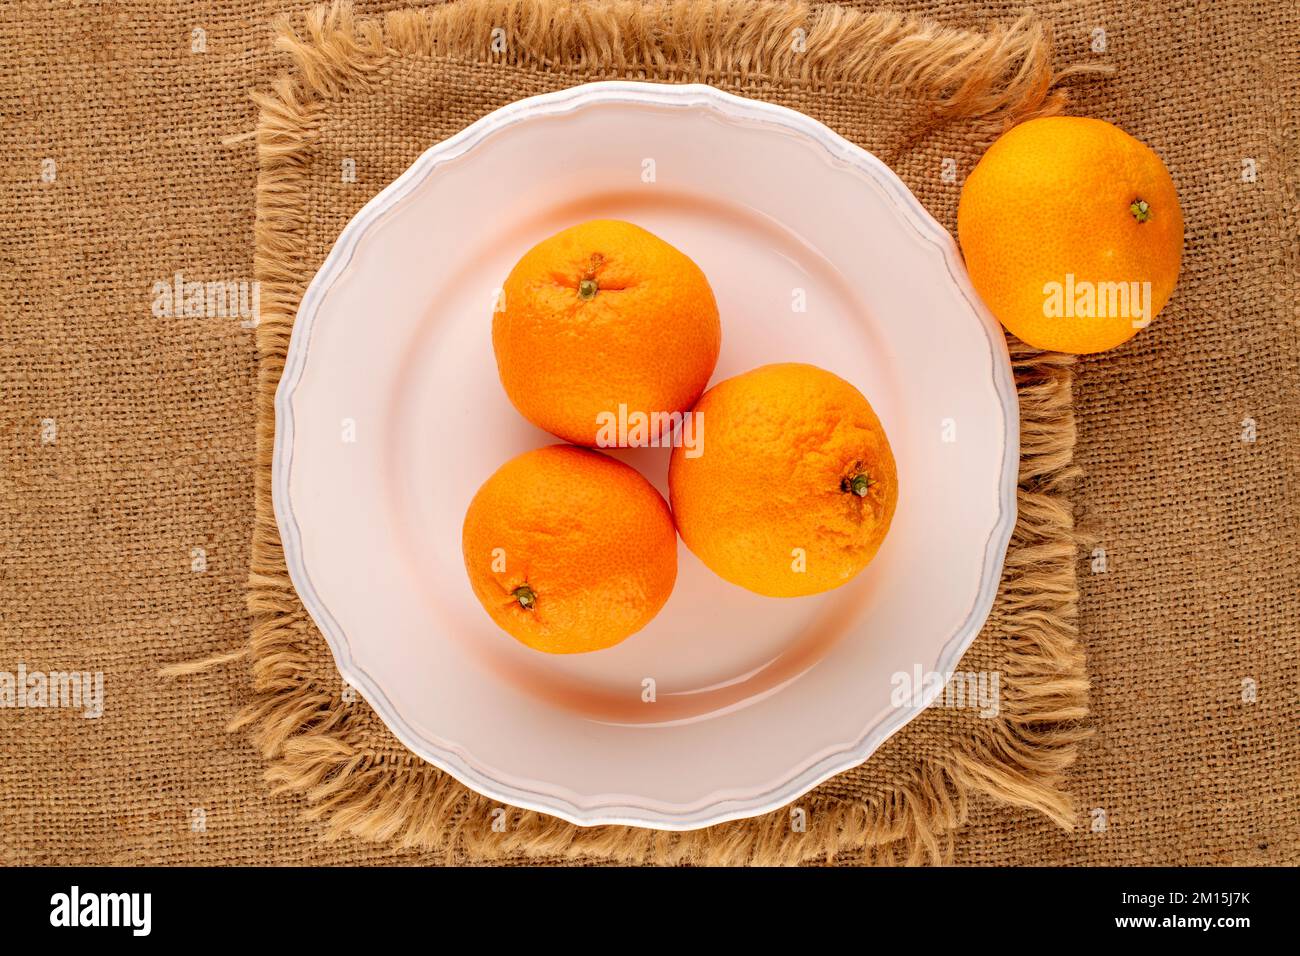 Several ripe tangerines in a white ceramic dish on a jute cloth, macro, top view. Stock Photo